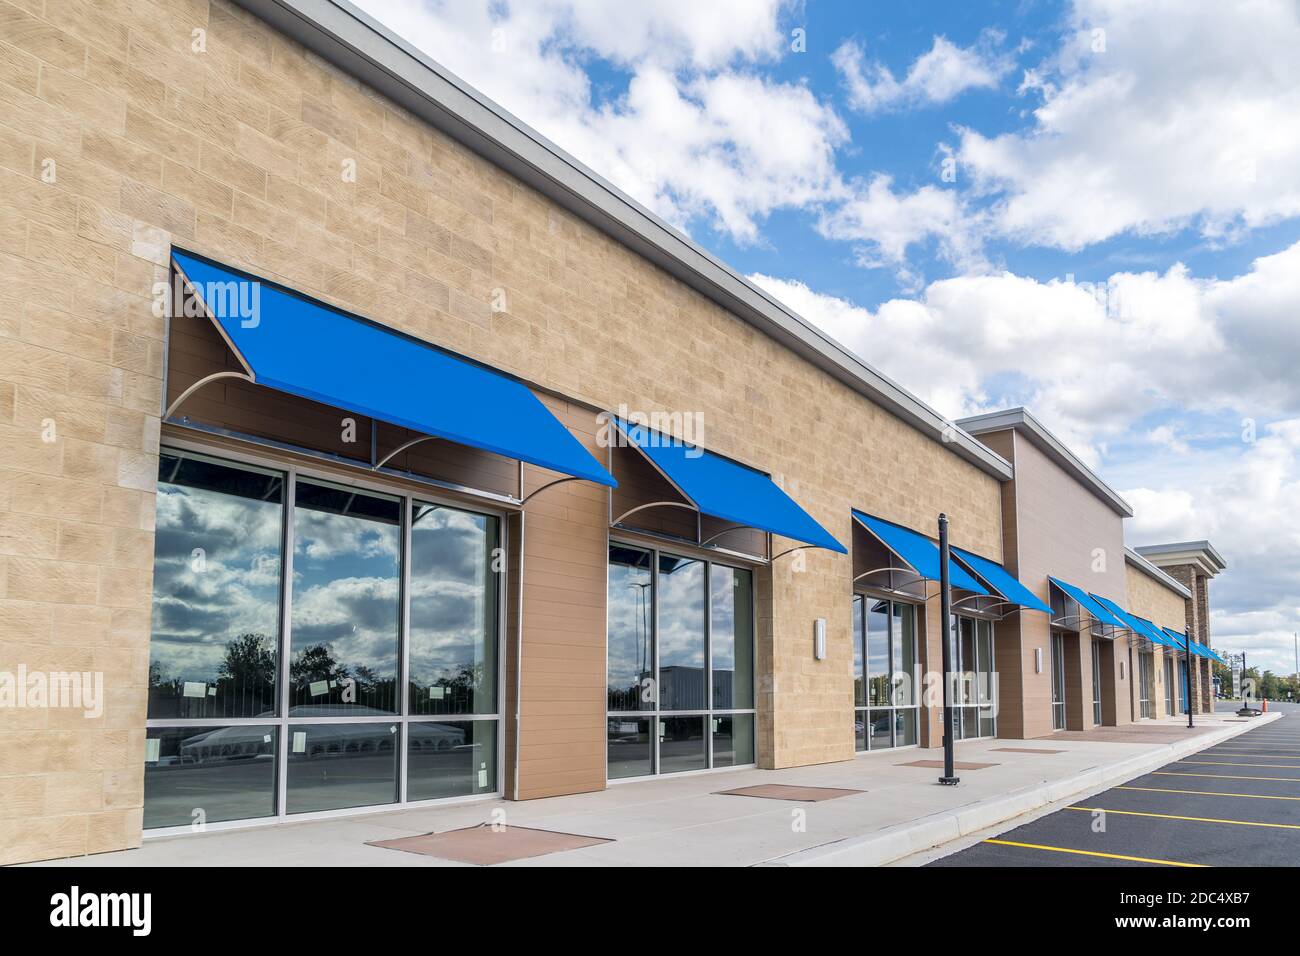 Brand new no logo, signage or label storefront of a under construction strip mall in the USA with blue awnings above the entrance, blue cloudy sky ref Stock Photo